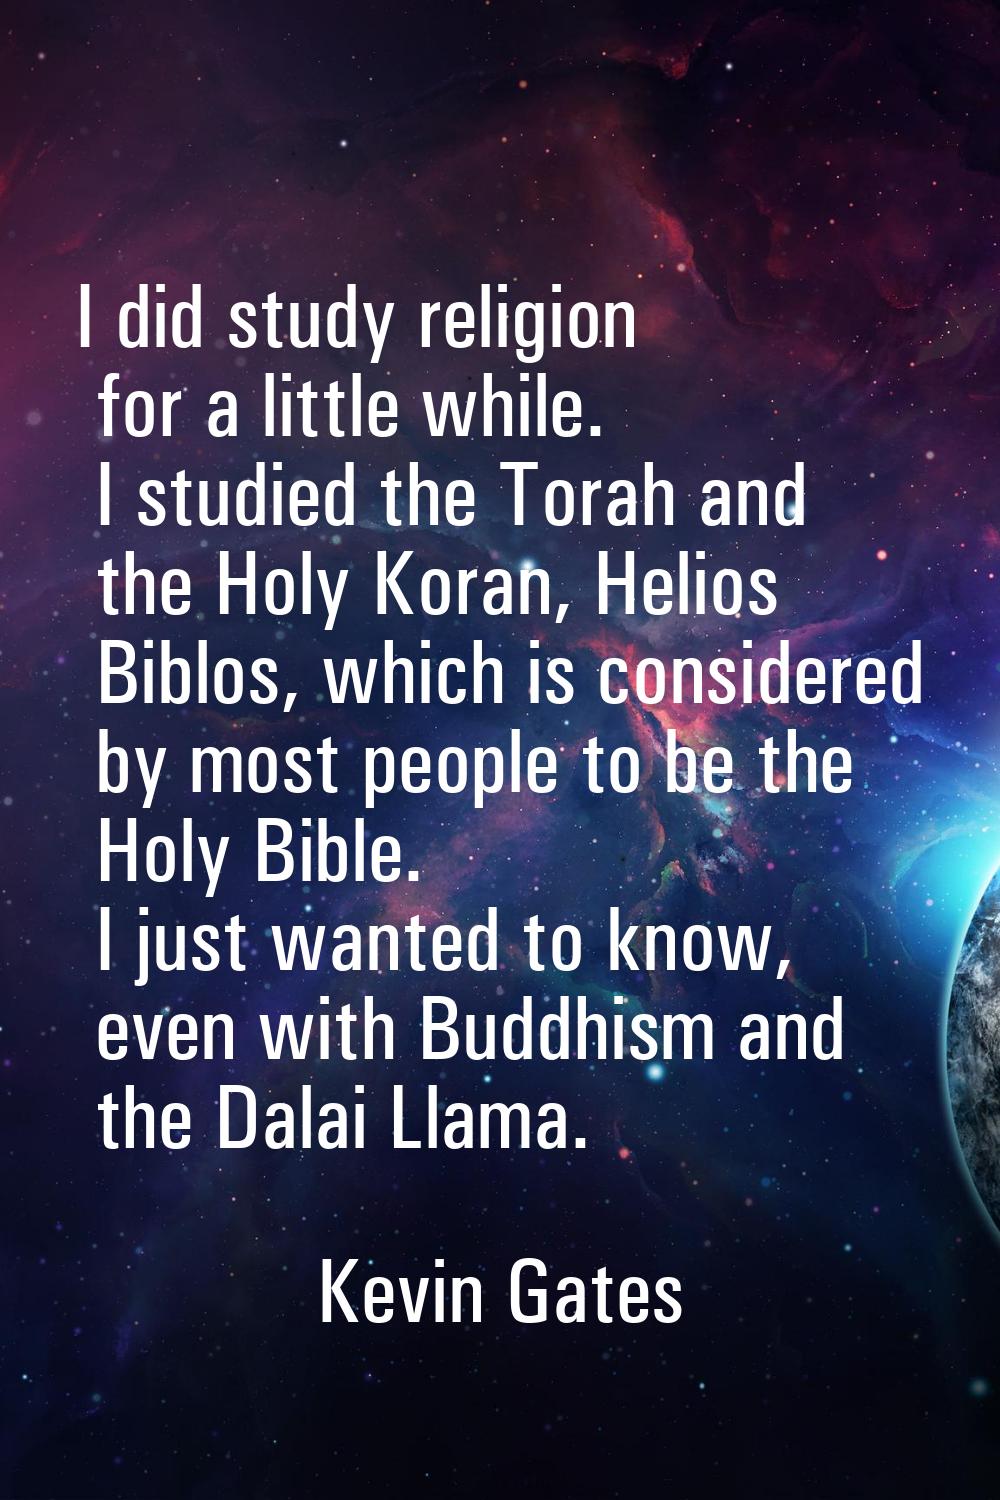 I did study religion for a little while. I studied the Torah and the Holy Koran, Helios Biblos, whi